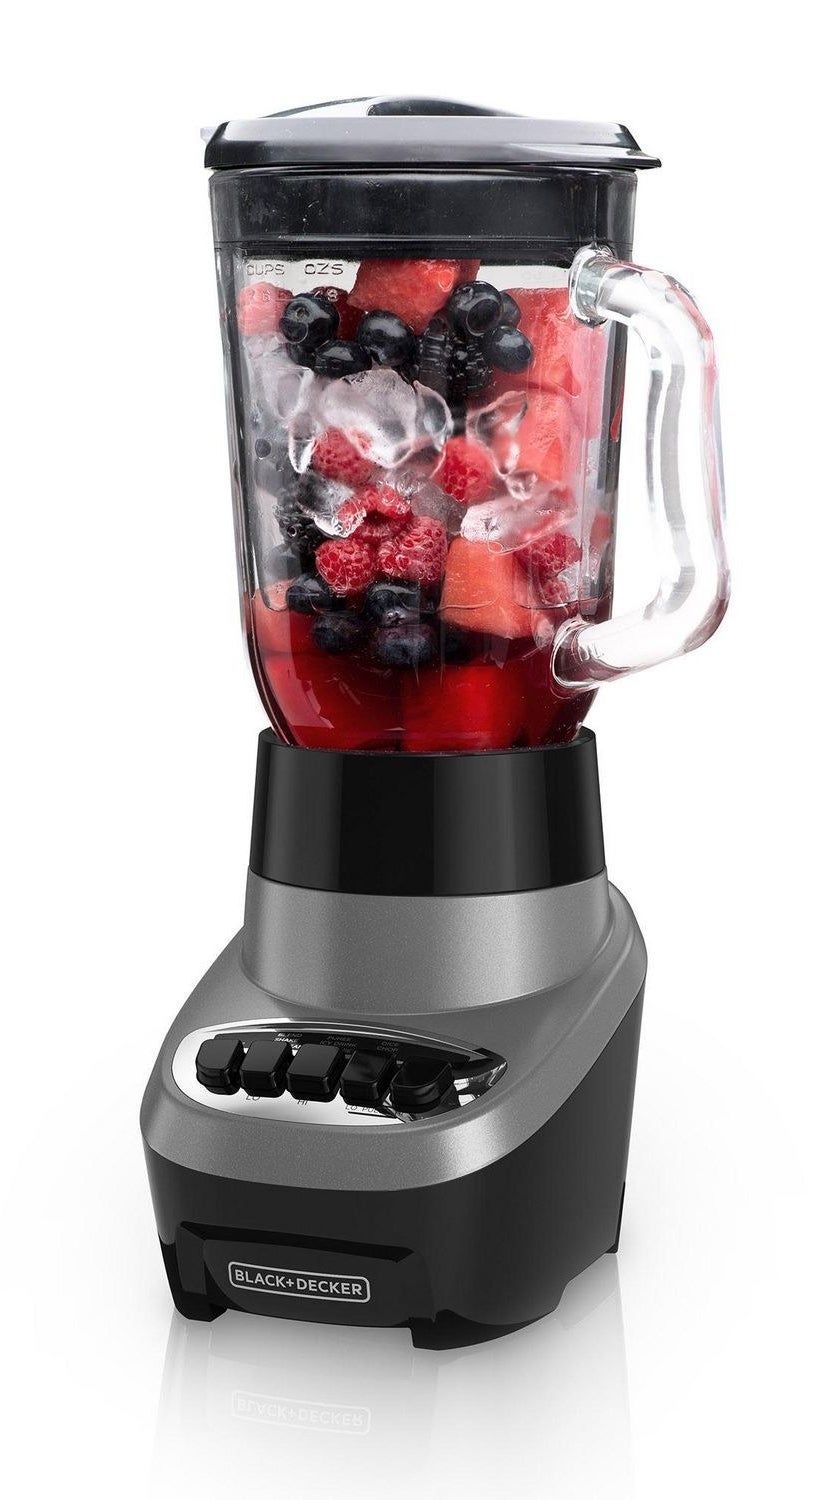 the blender with fruit and ice in it